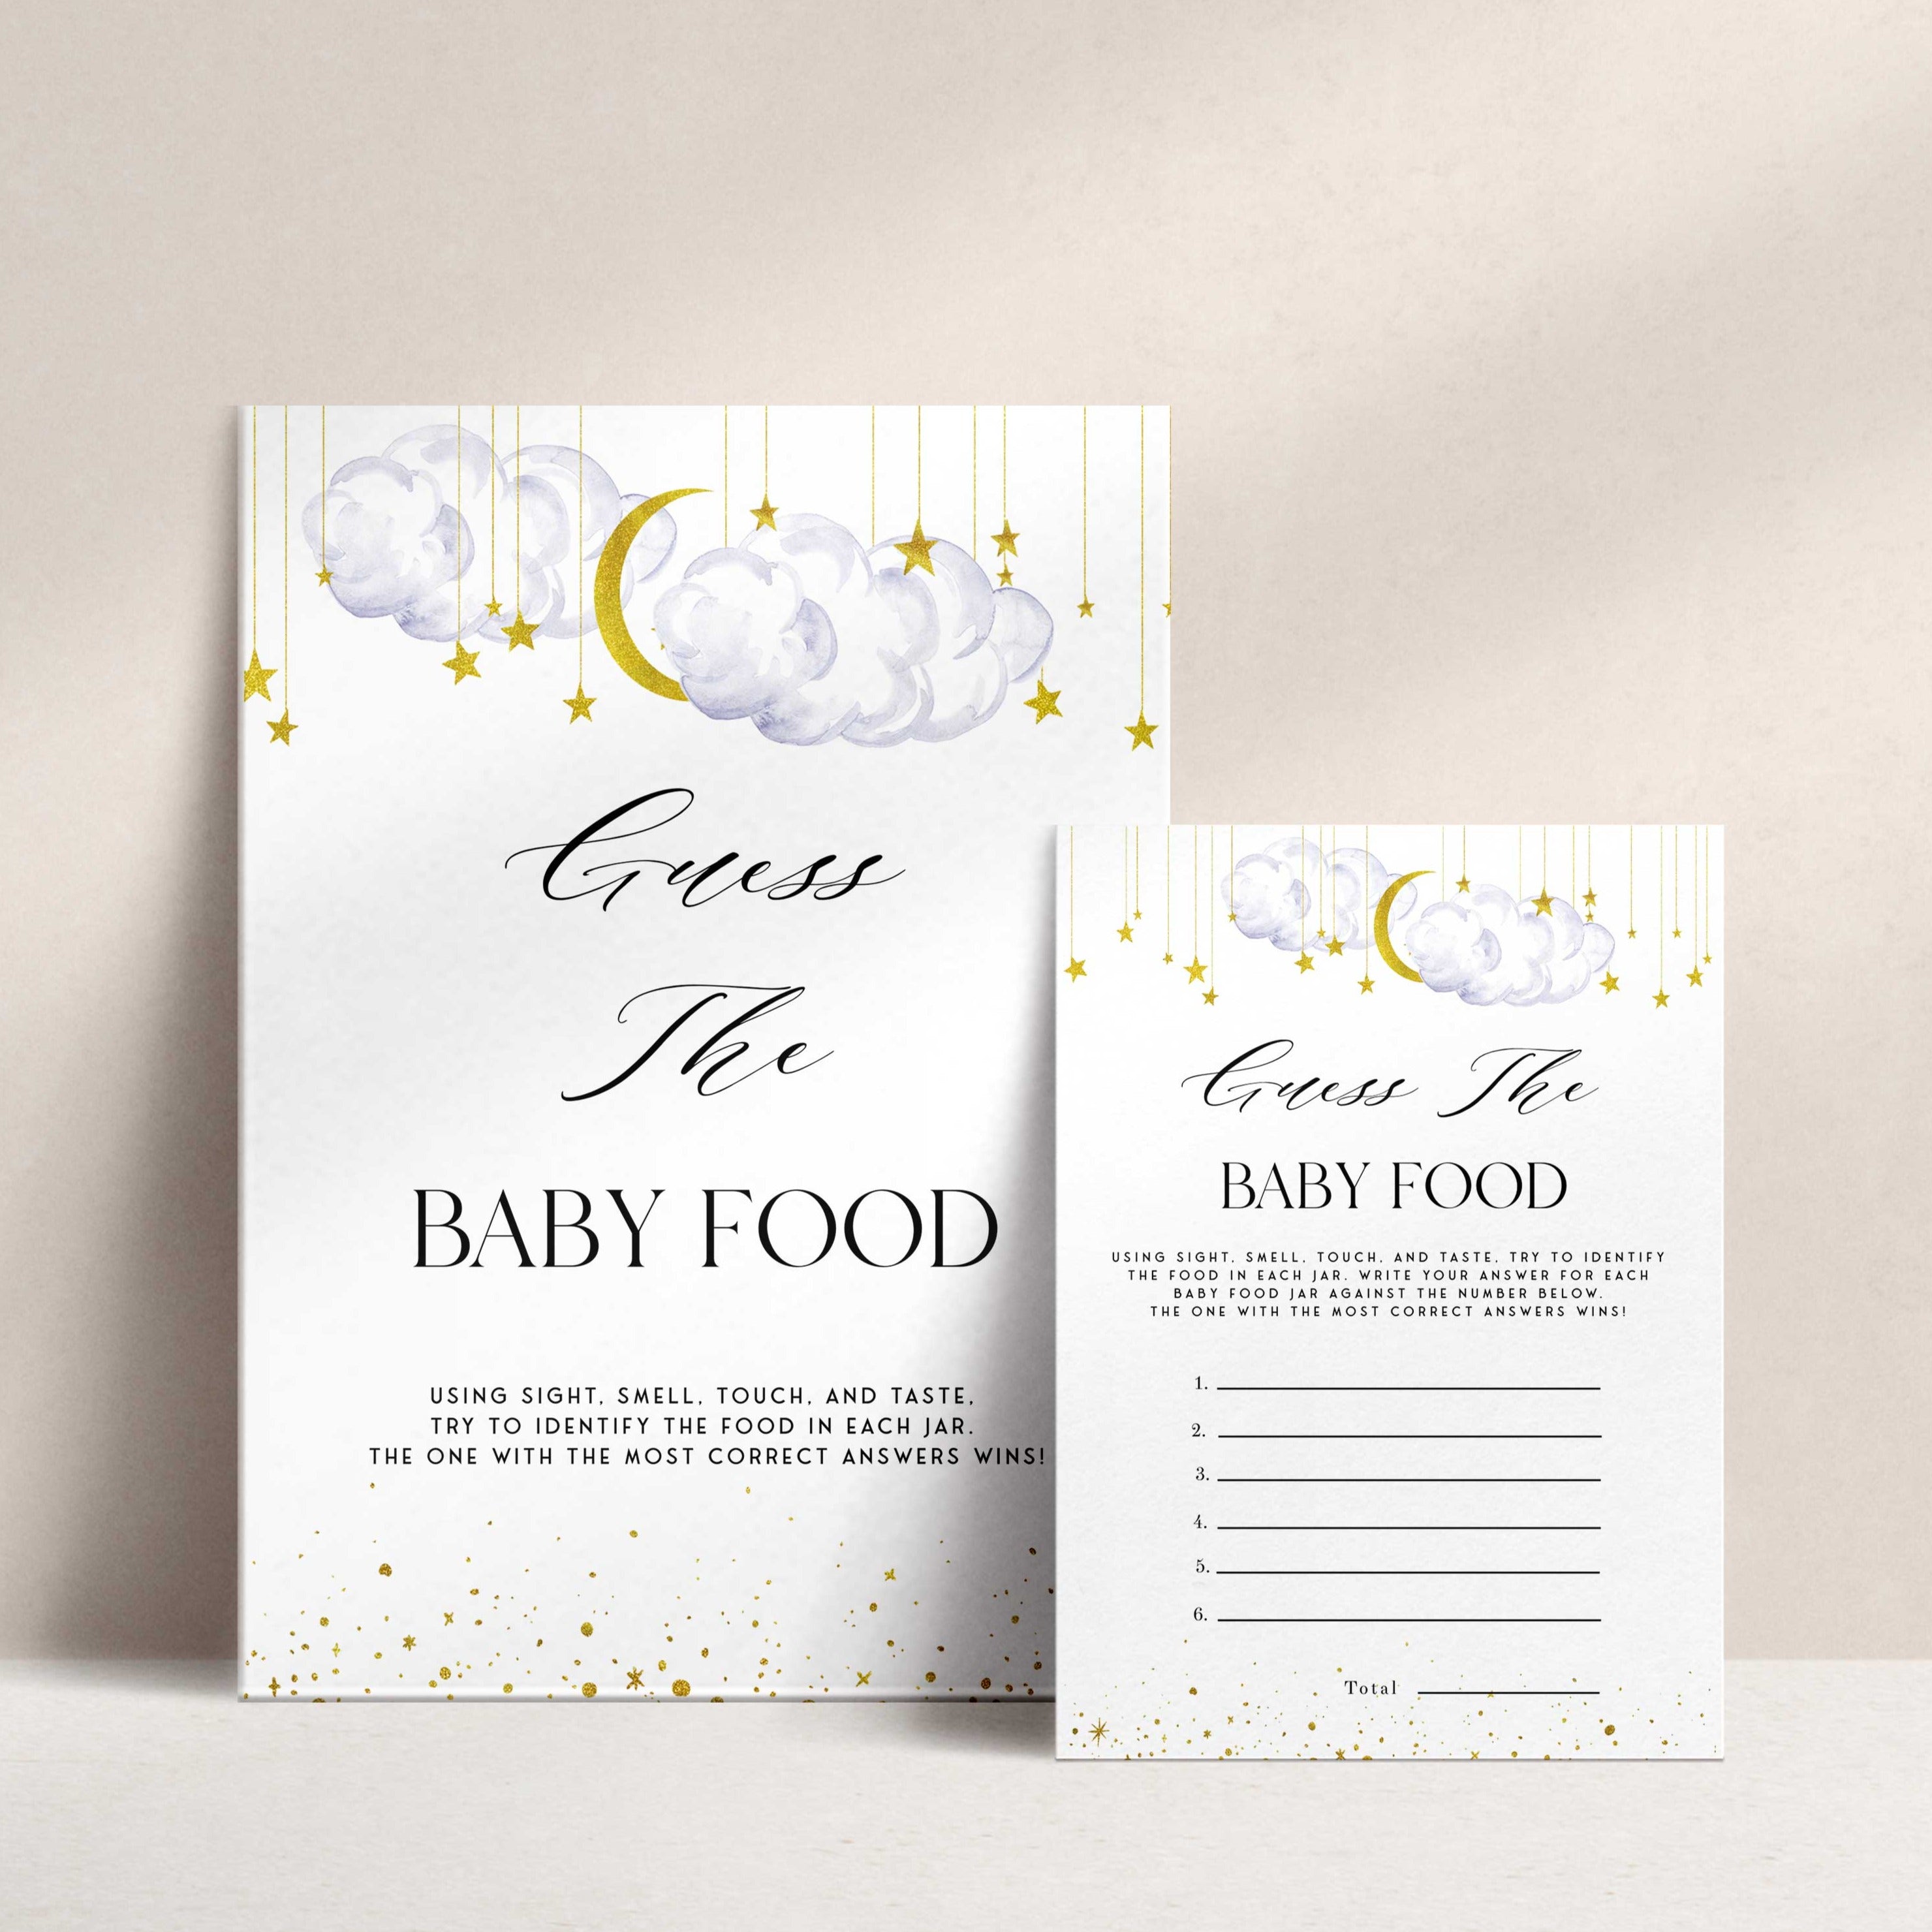 Fully editable and printable baby shower guess the baby food game with a little star design. Perfect for a Twinkle Little Star baby shower themed party